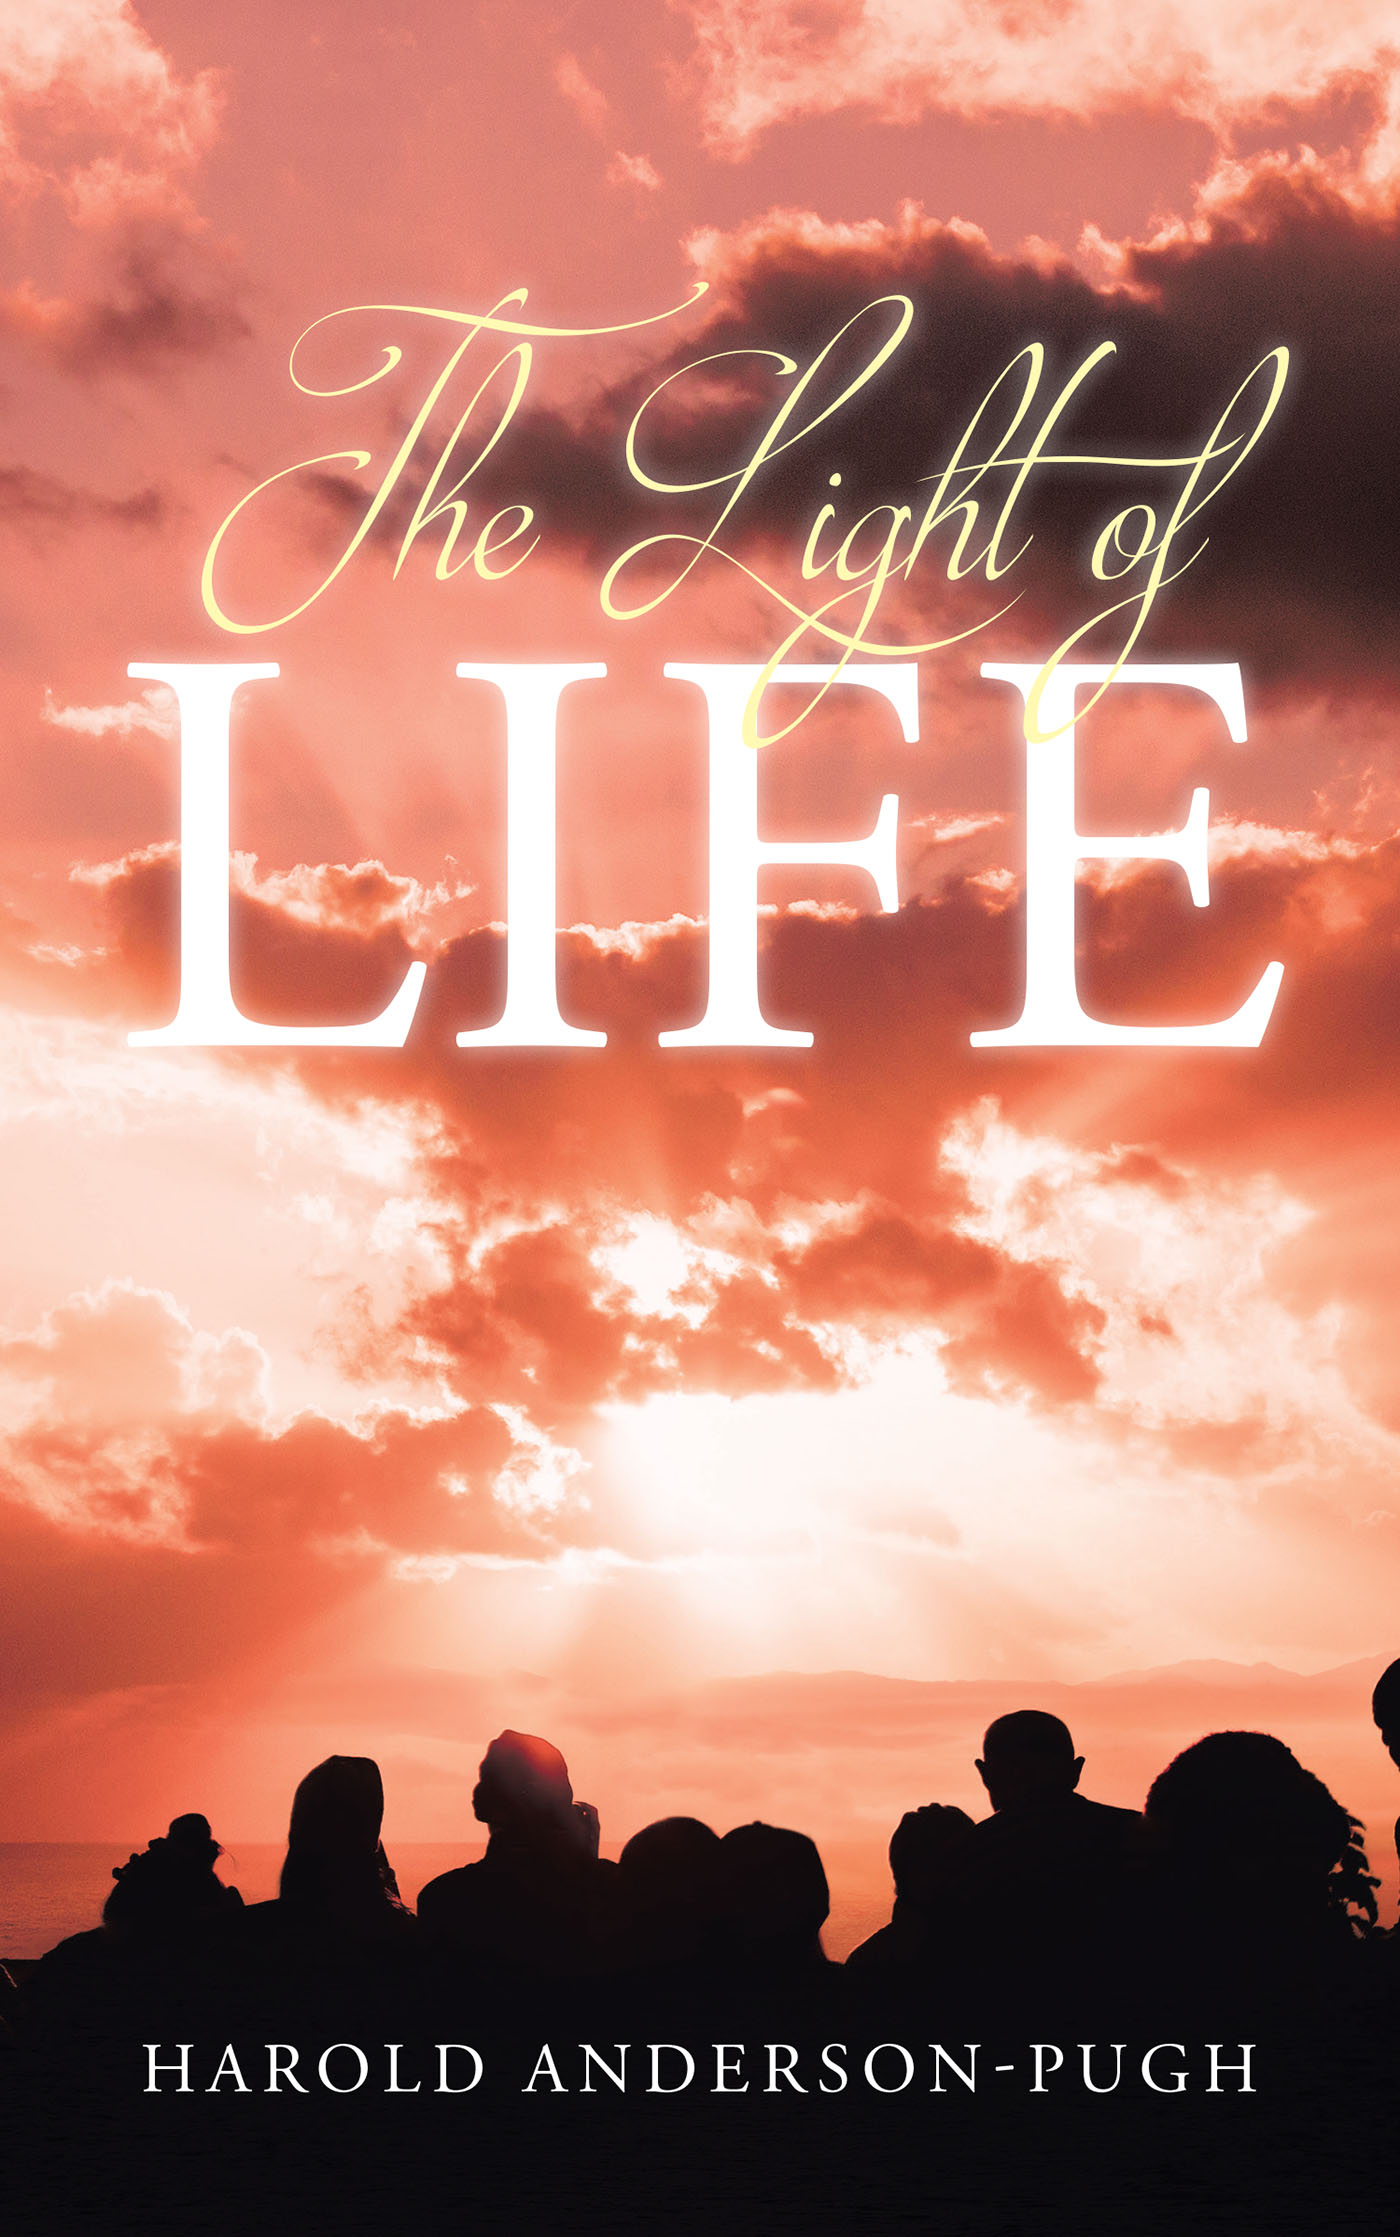 Author Harold Anderson-Pugh’s New Book, "The Light of Life," is an Eye-Opening Series of Poems Exploring the Author’s Deep Understanding of Life and the Human Condition